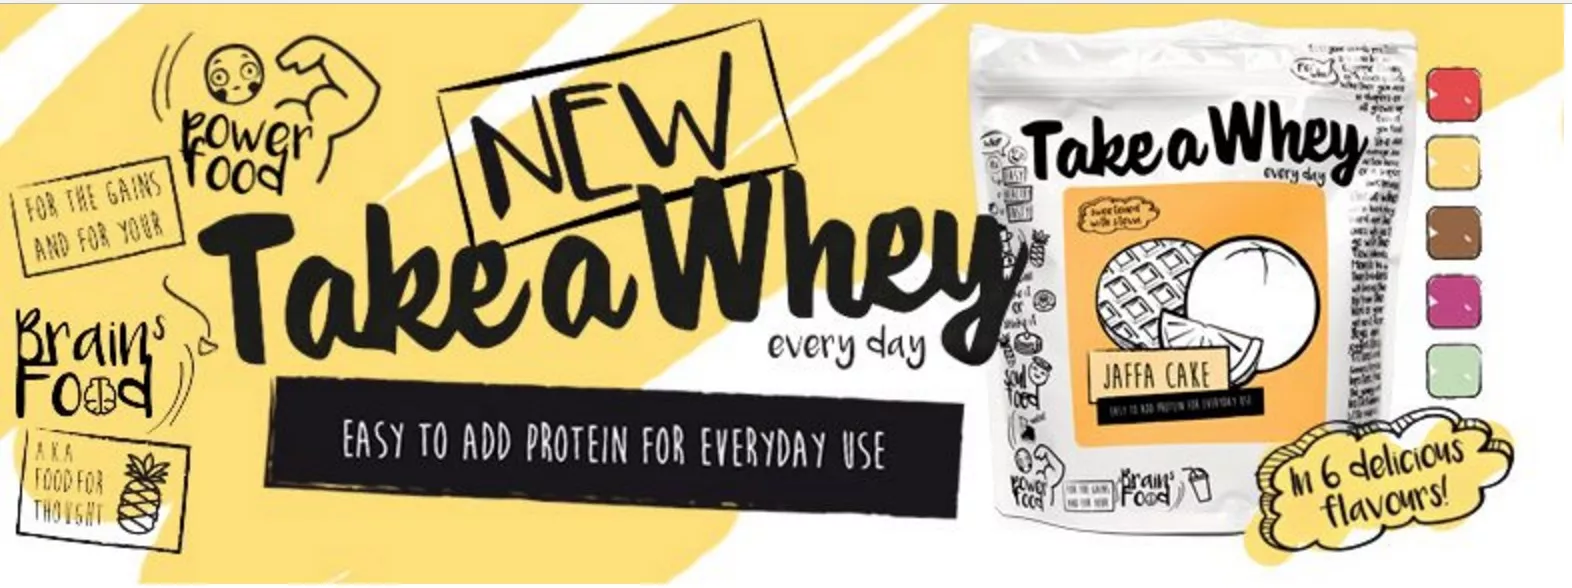 Take a Whey every day Protein